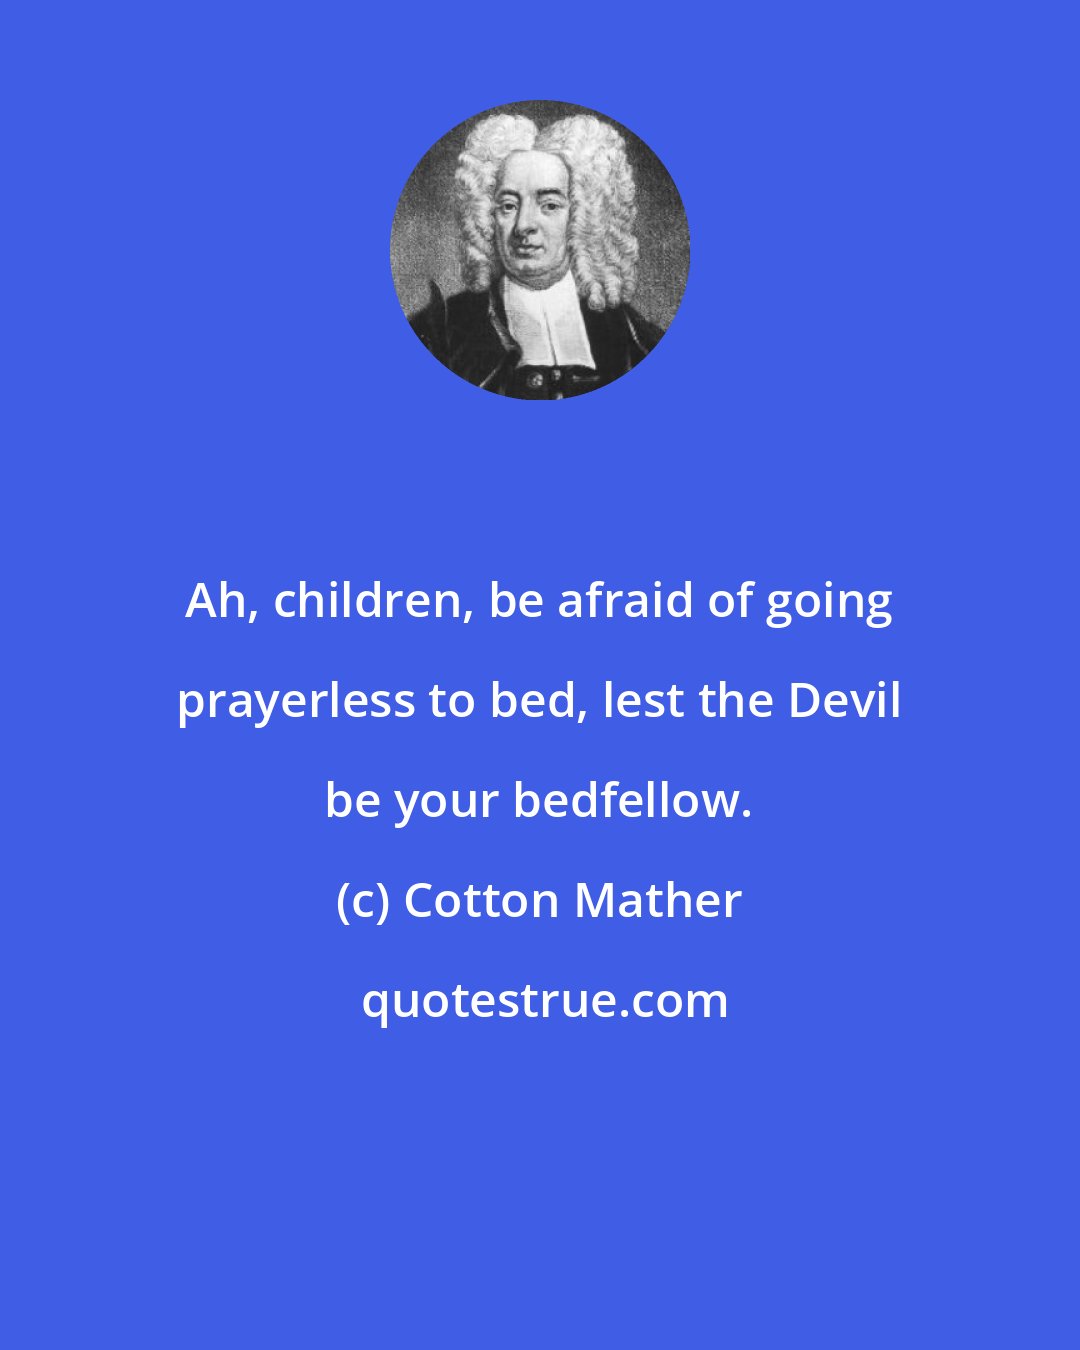 Cotton Mather: Ah, children, be afraid of going prayerless to bed, lest the Devil be your bedfellow.